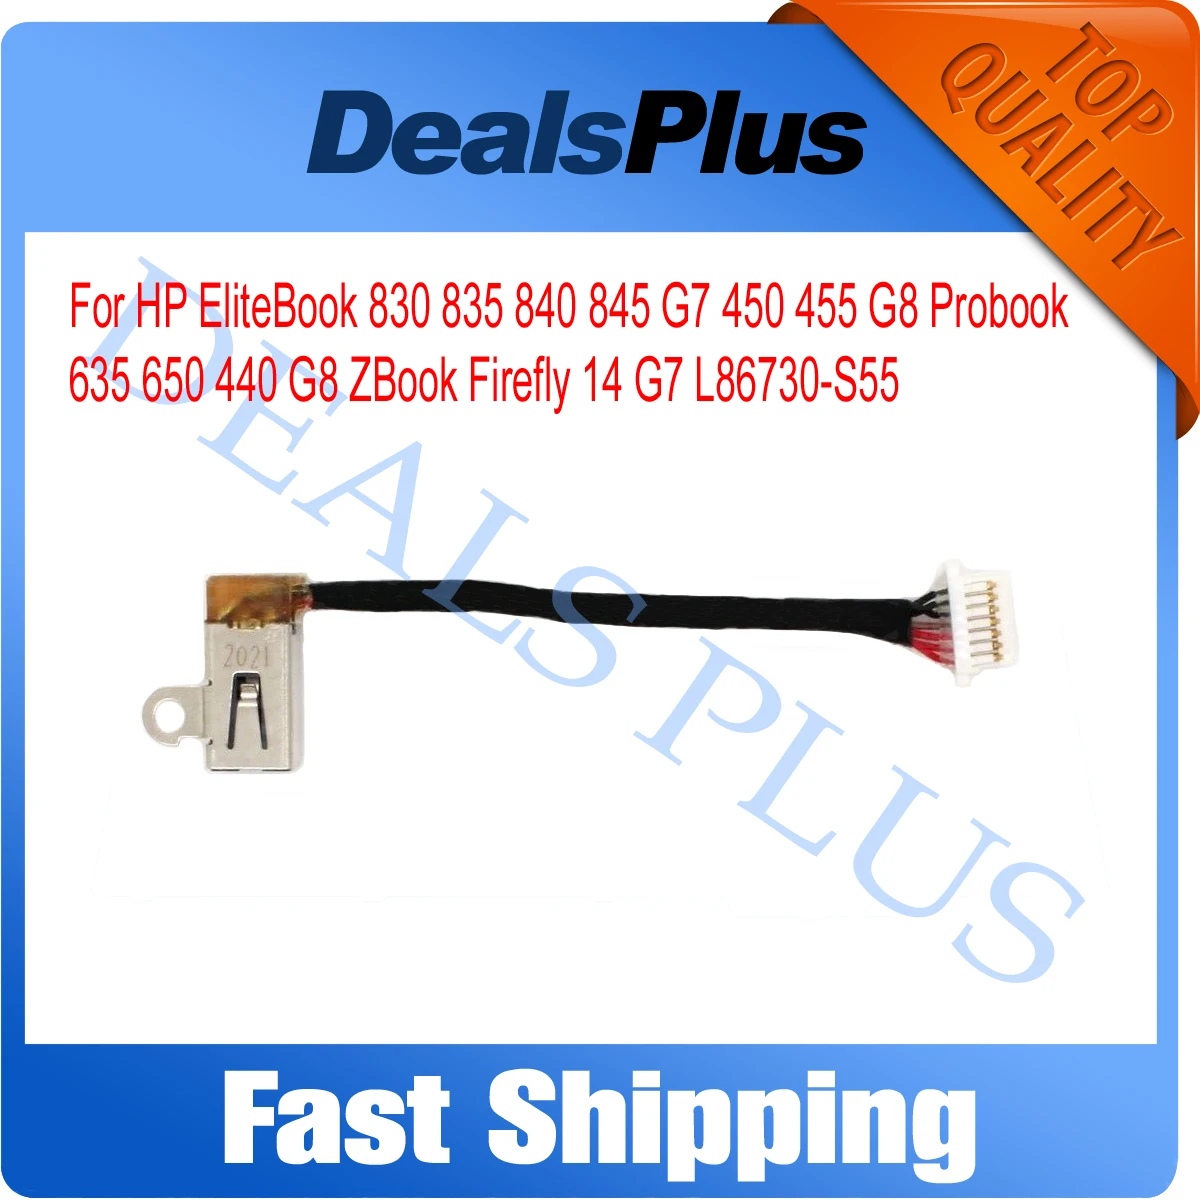 

New Replacement DC Power Jack Cable For HP EliteBook 830 835 840 845 G7 450 455 G8 Probook 635 650 440 G8 ZBook Firefly 14 G7